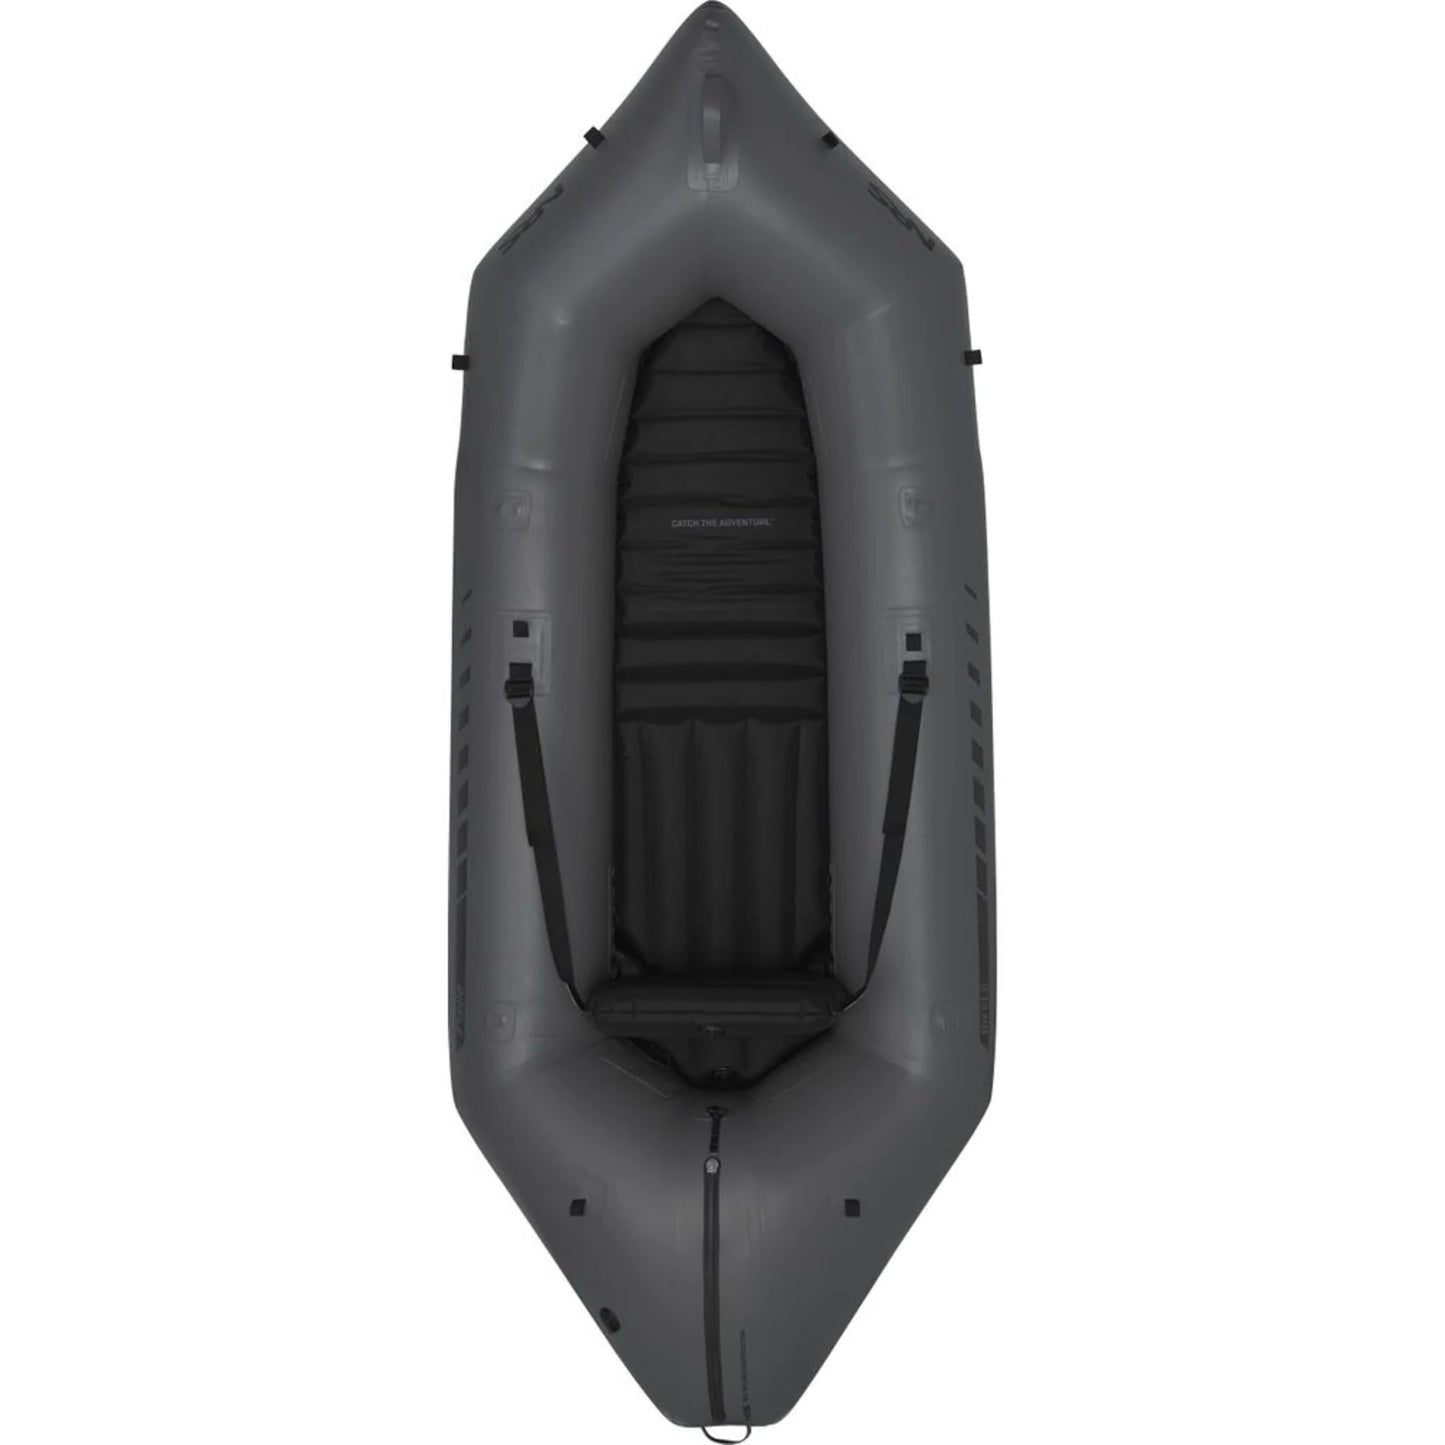 An inflatable Riffle Fishing Packraft by NRS in black on a white background.